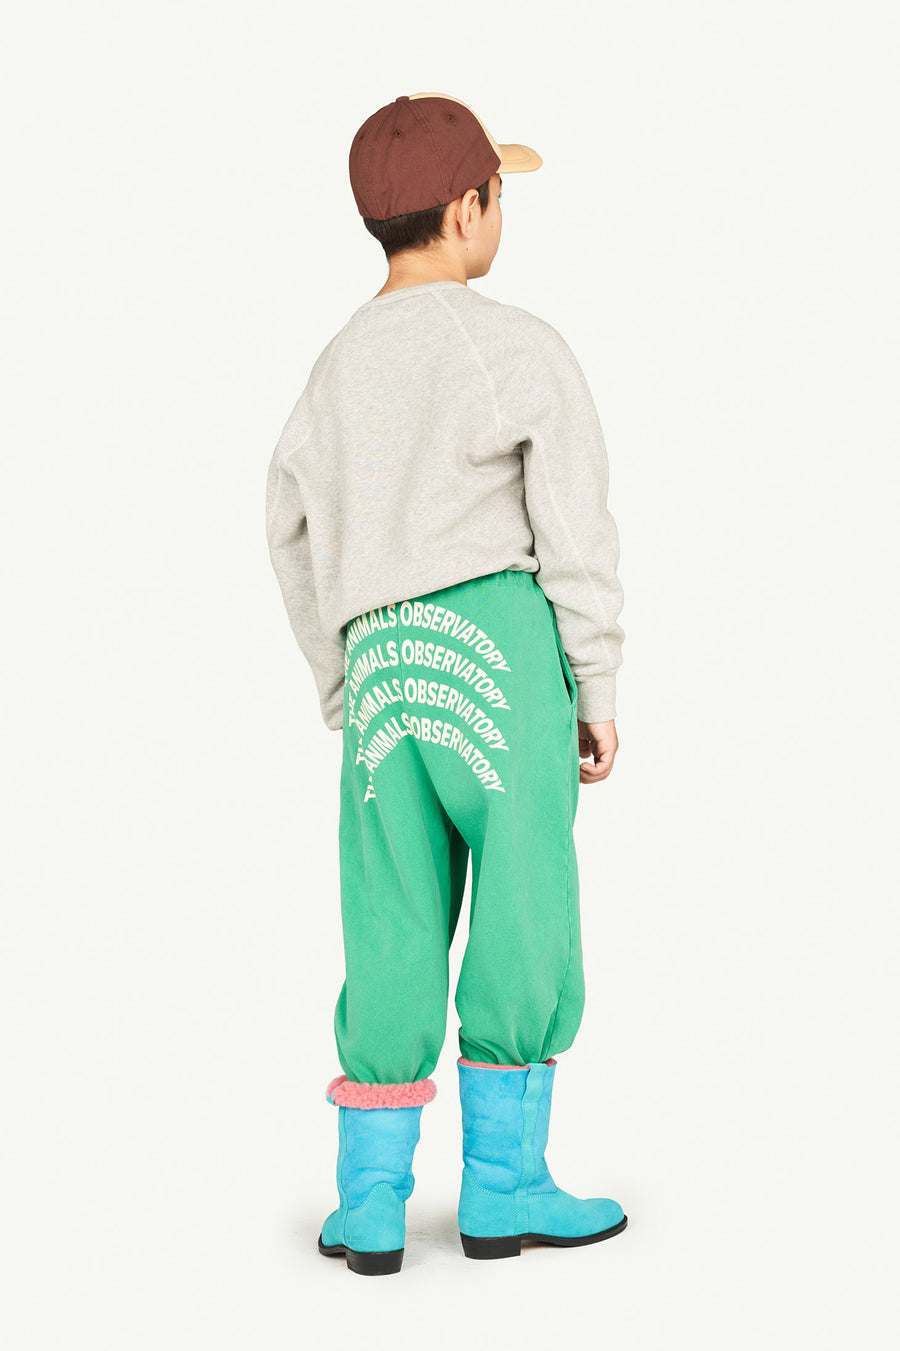 The animals observatory - Stag kids pants - Green logos